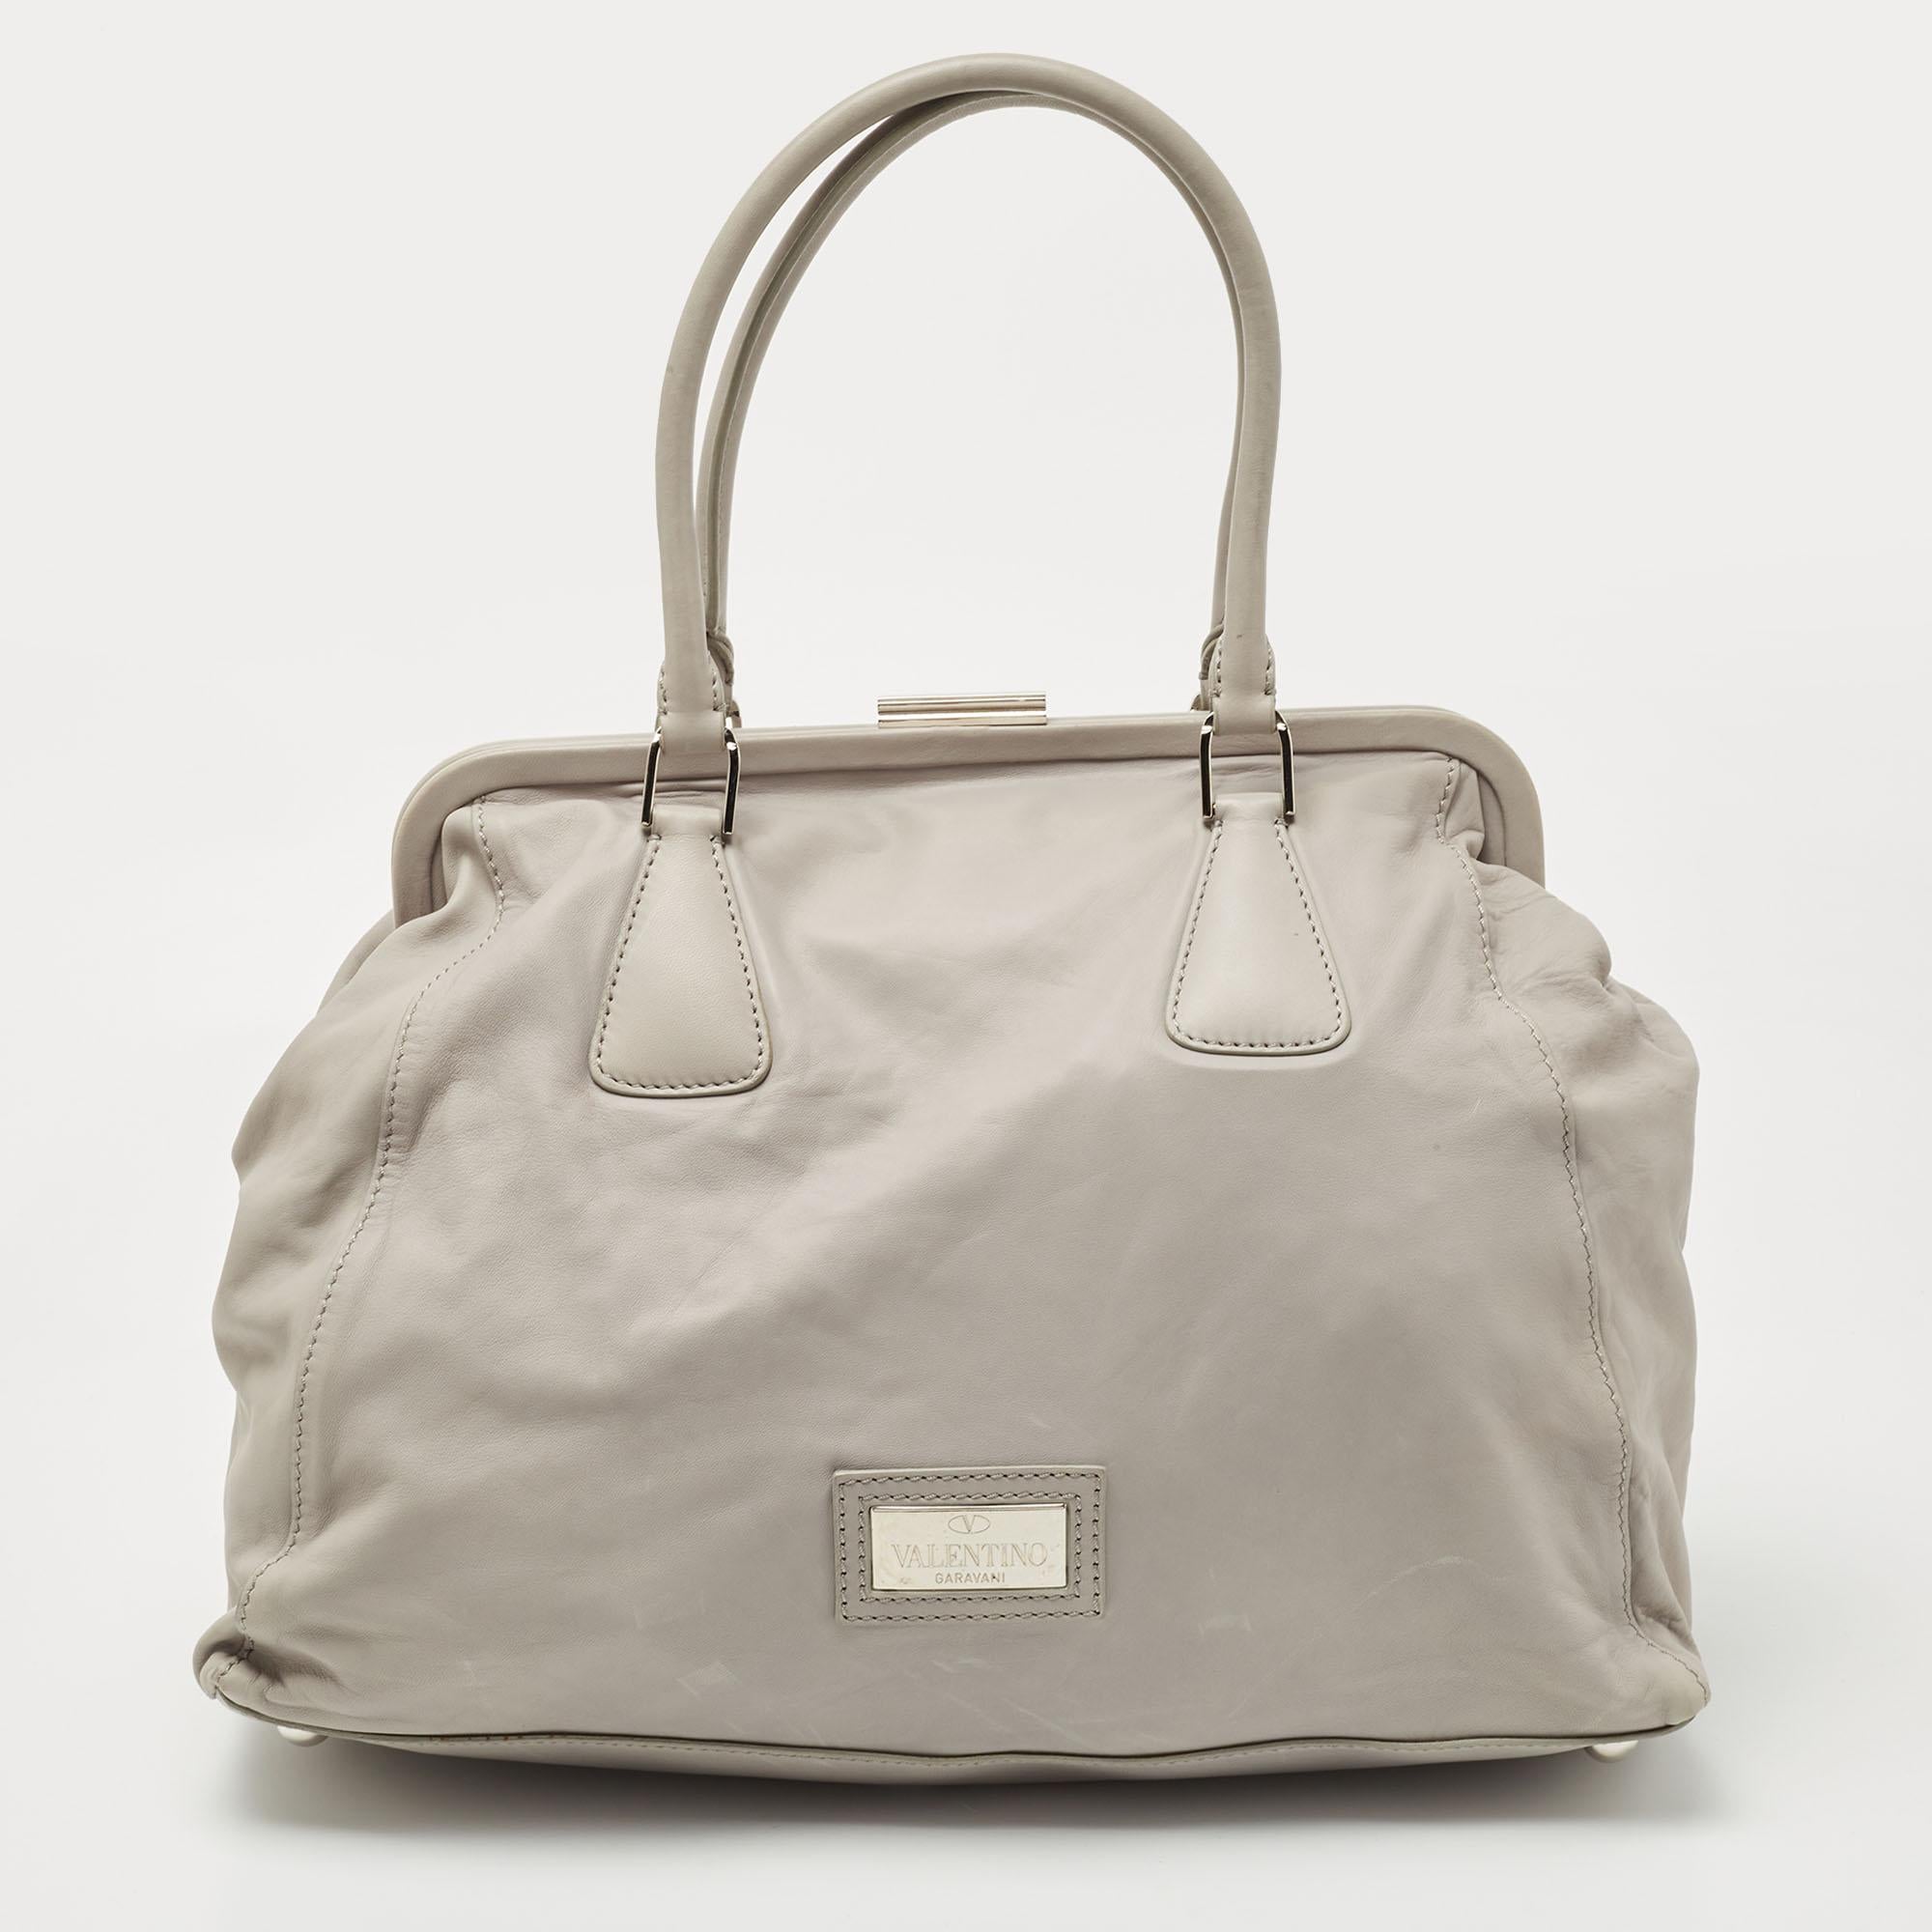 This satchel is rendered in the finest quality materials into an elegant design. Versatile and functional, it is well-sized for your daily use.

Includes: Detachable Zip Pouch